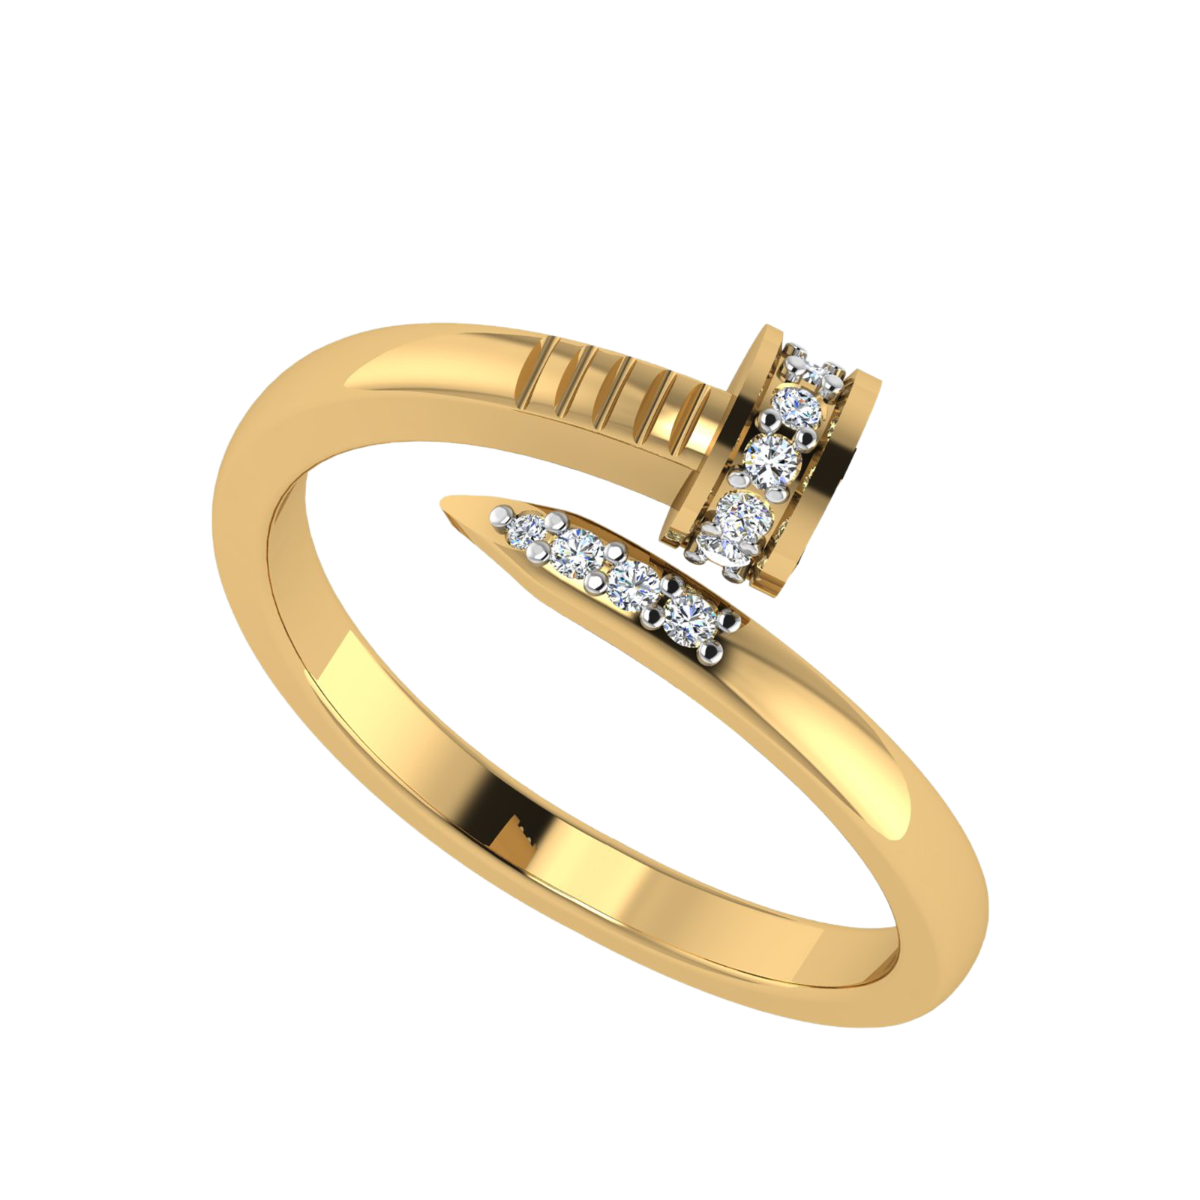 Motisons Jewellers | Where you'll find the perfect piece